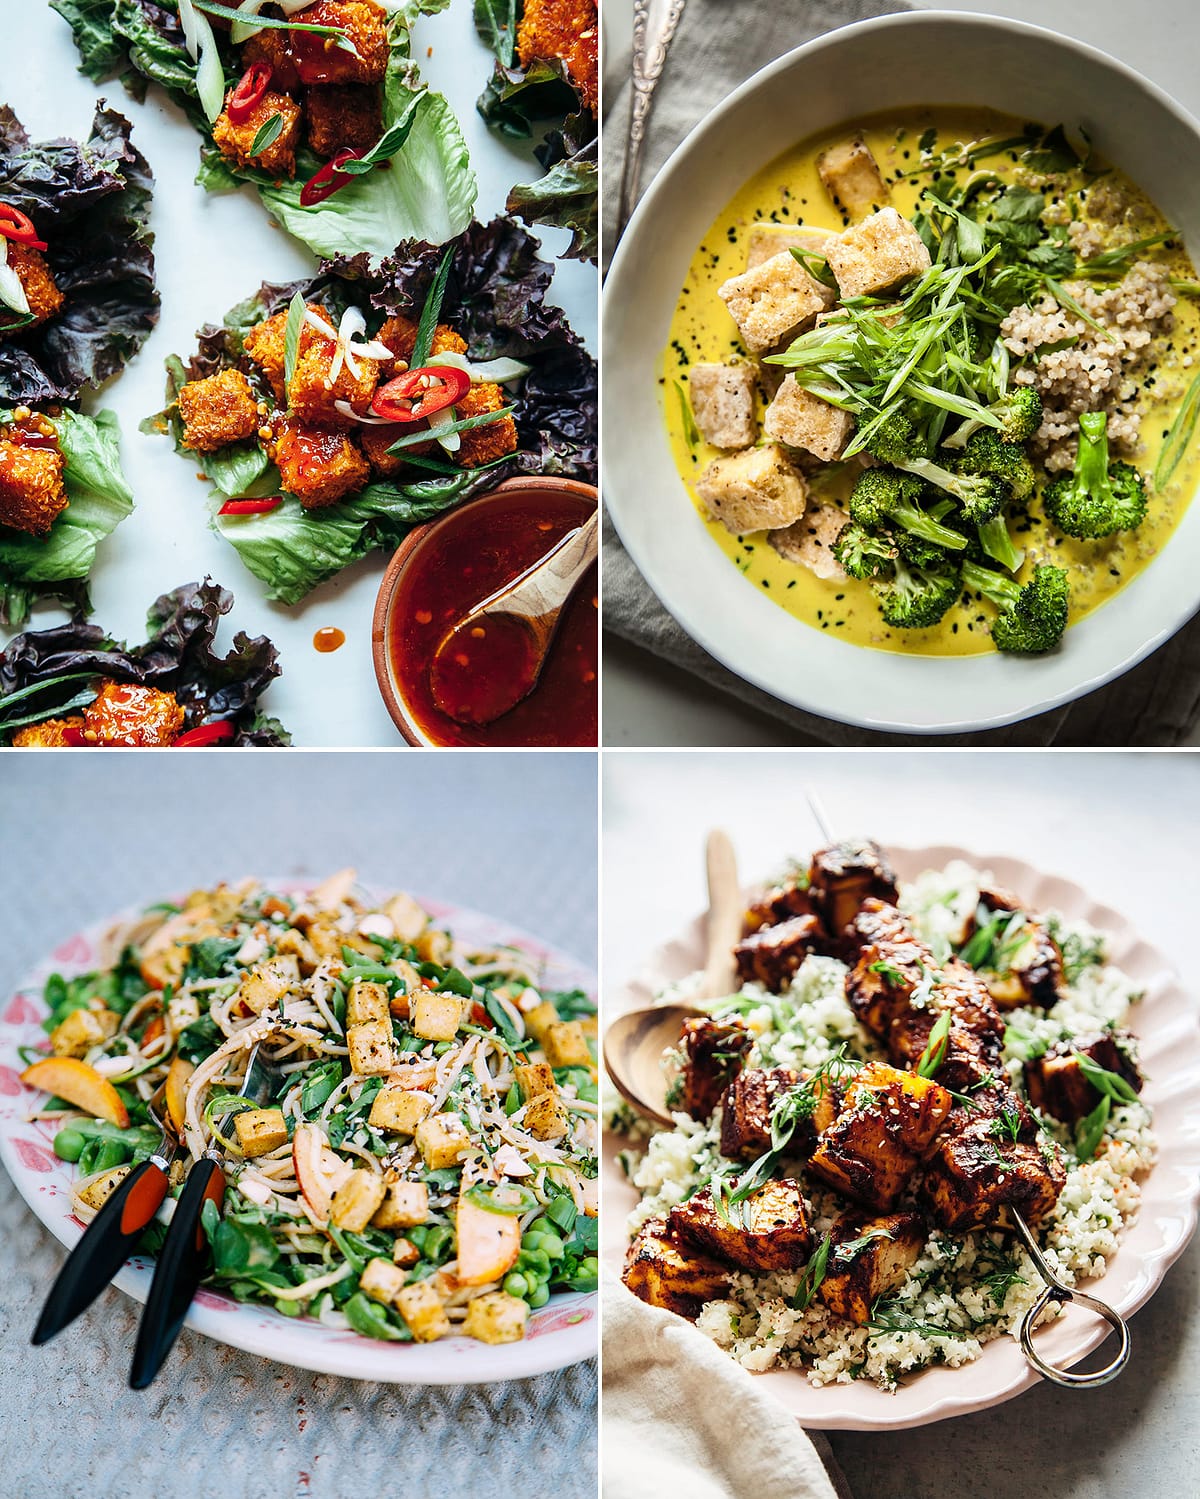 A grid shows 4 vegan tofu recipes: coconut tofu lettuce wraps, golden coconut broth bowls with tofu and vegetables, a veg noodle salad with seared tofu, and grilled tofu and pineapple skewers